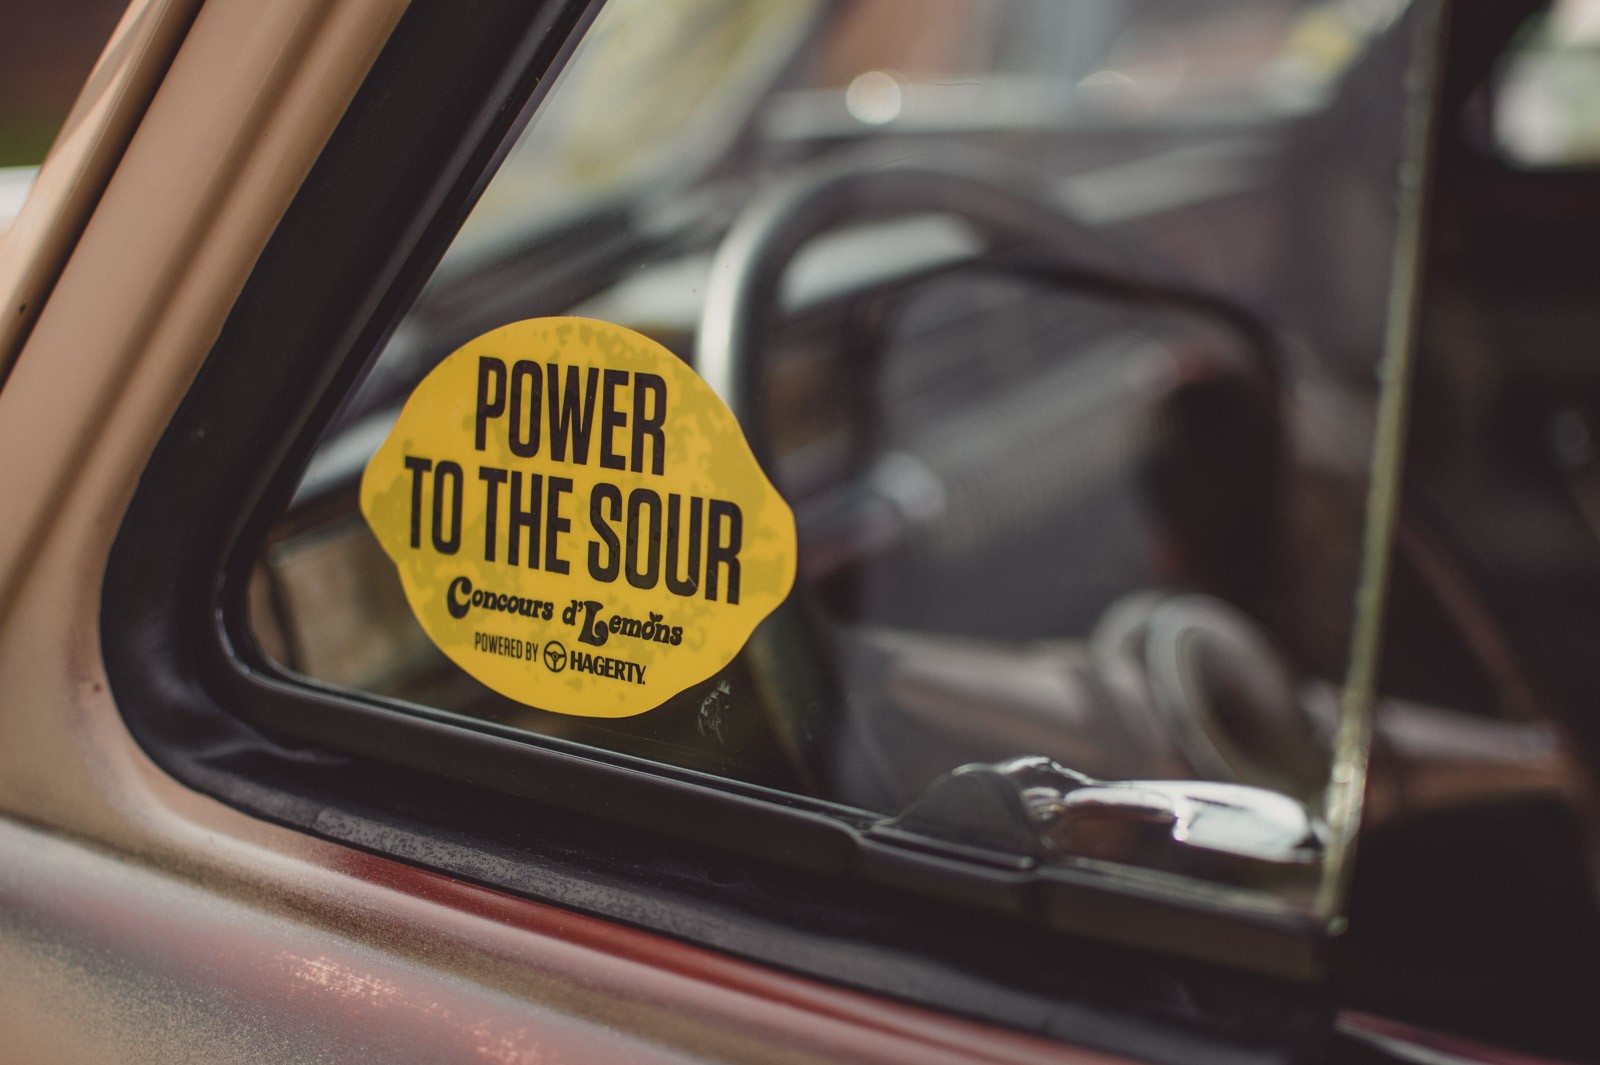 Power to the sour decal on side window of a car